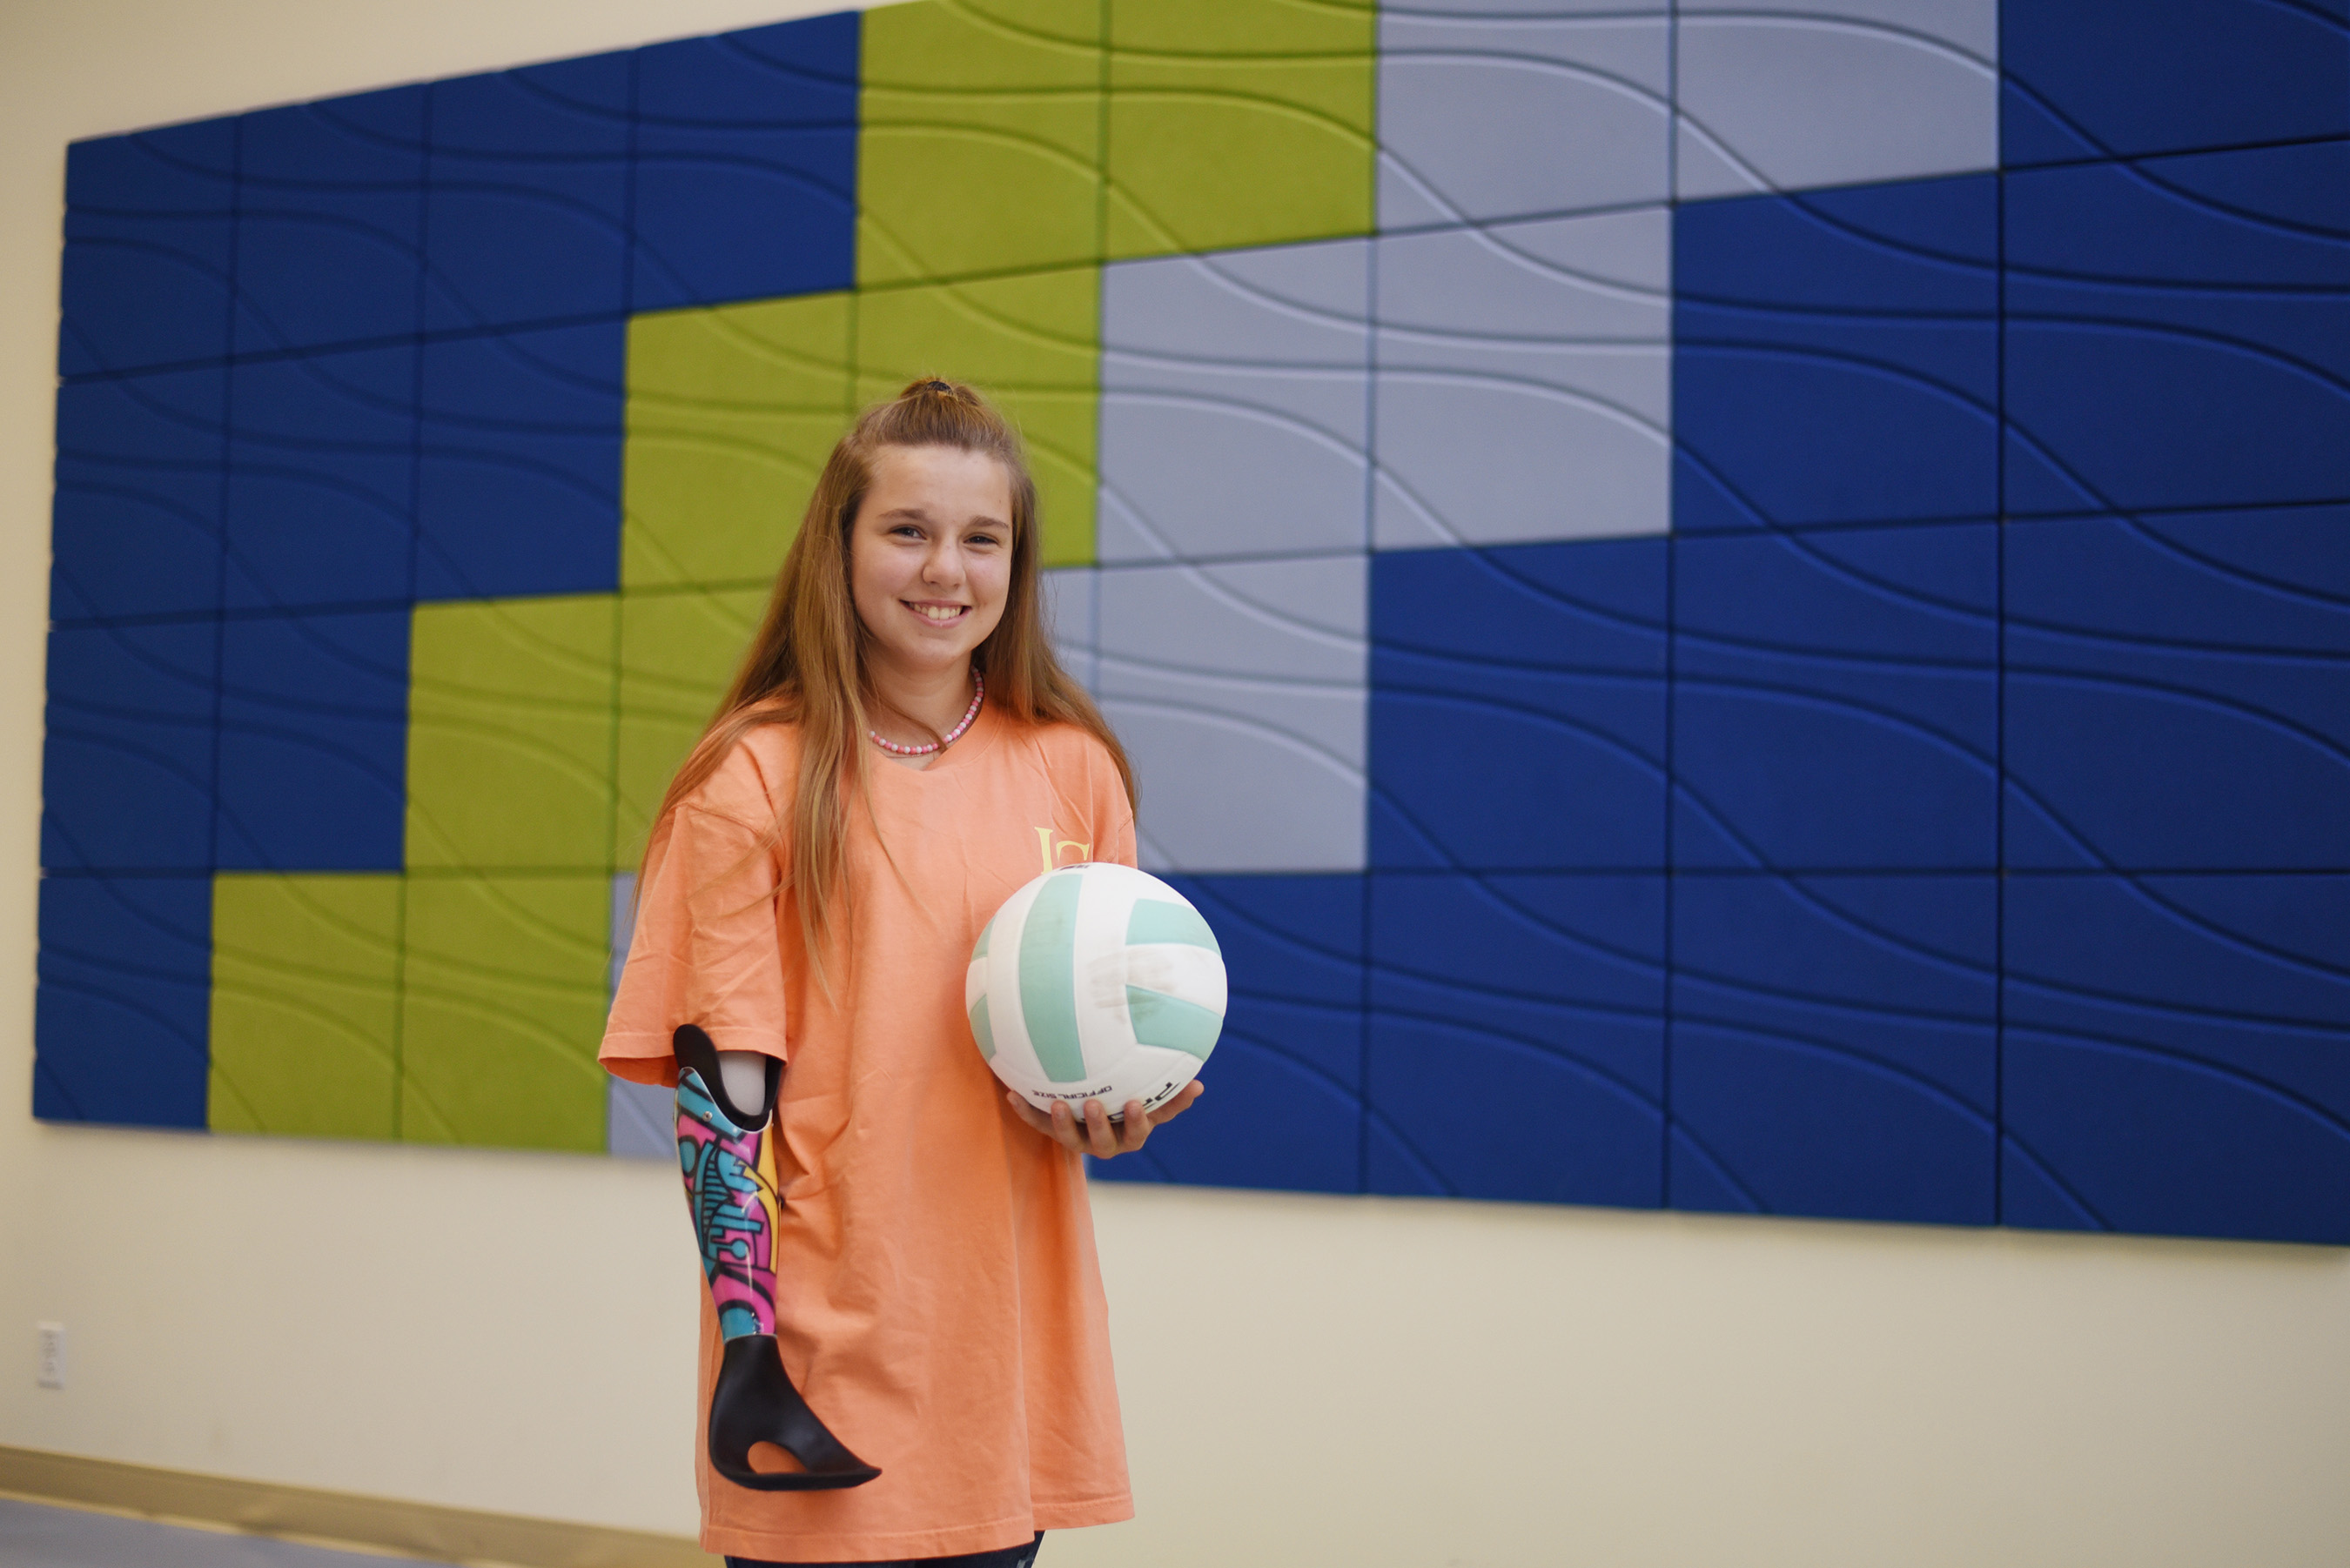 Scottish Rite for Children patient Shaleigh with her volleyball prosthetic from the By Way of Dallas collaboration.